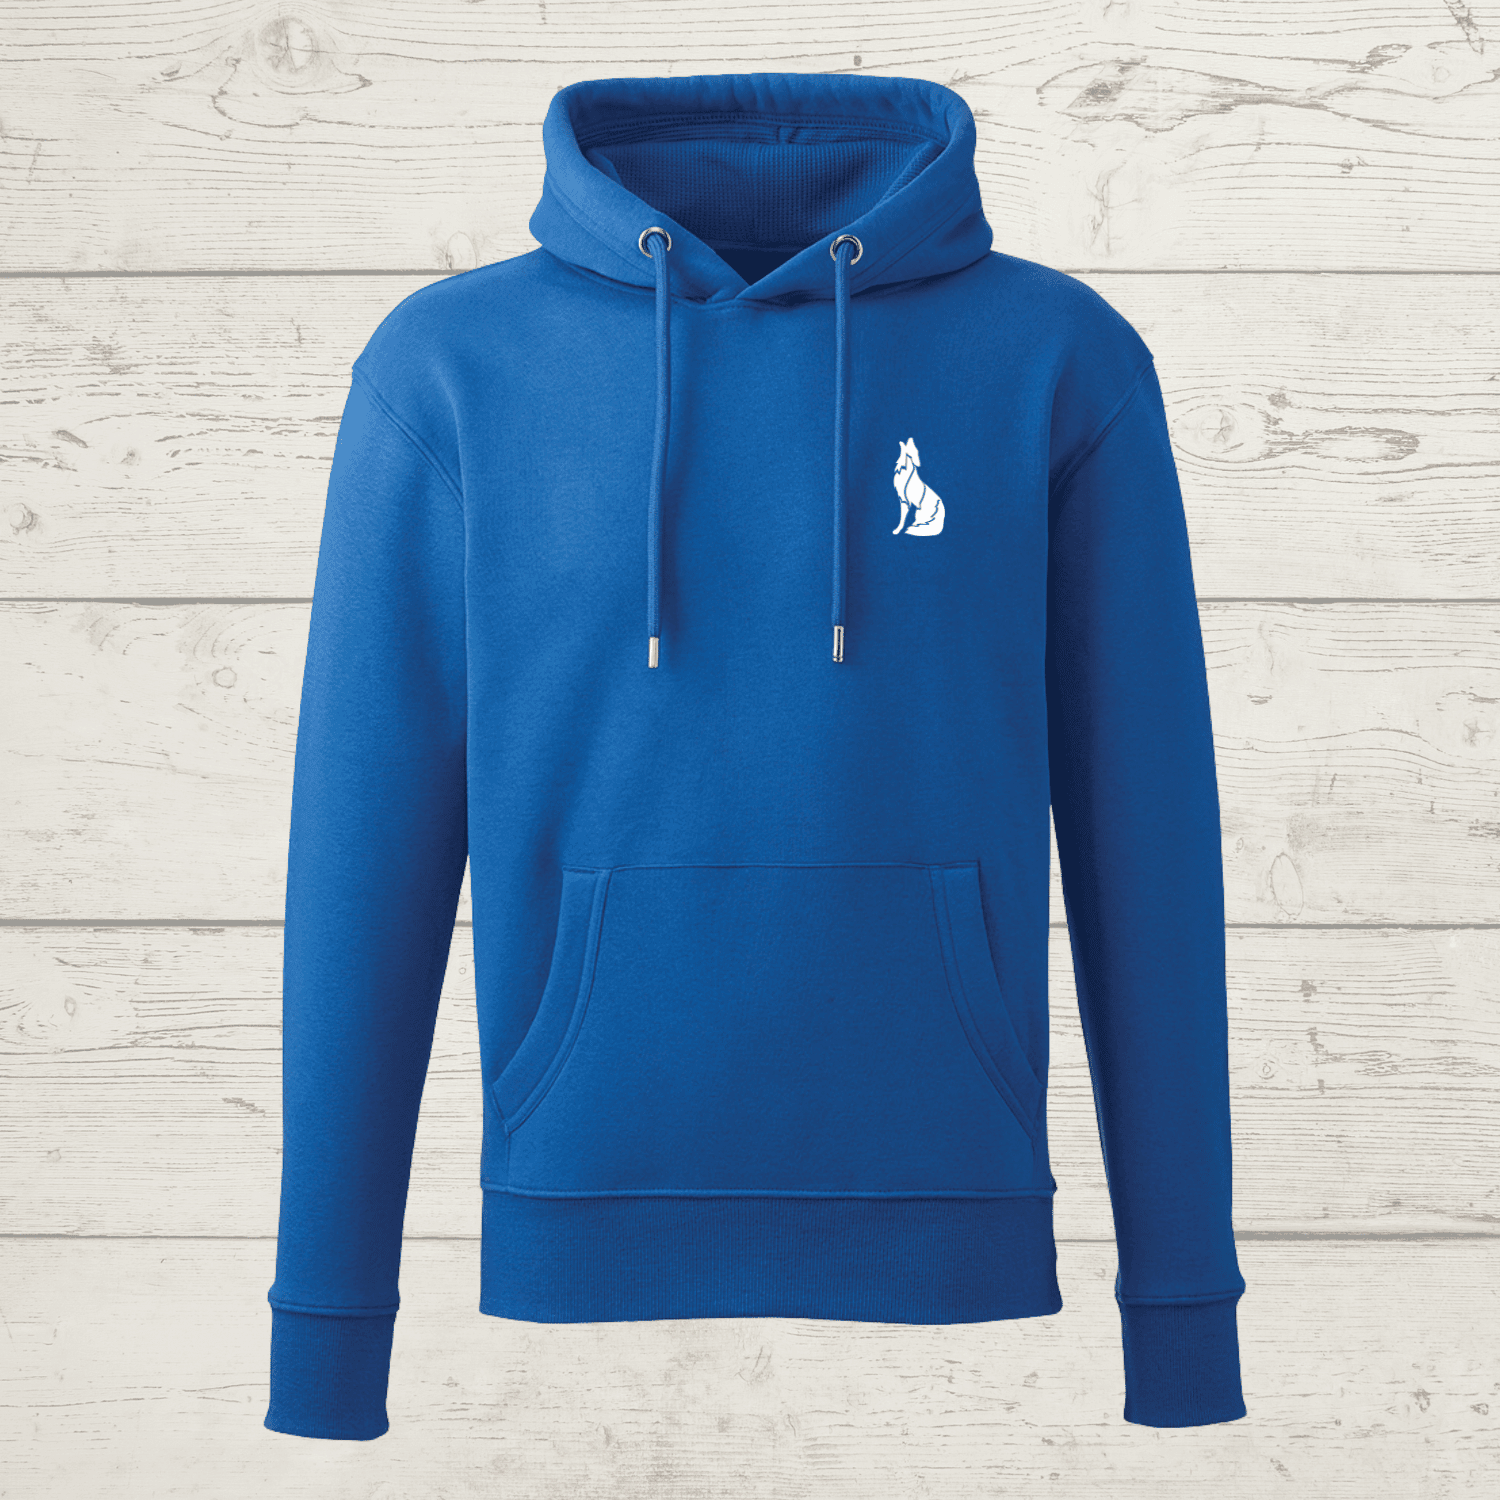 Ecoyote new super luxe planting 25 trees hoody - royal blue